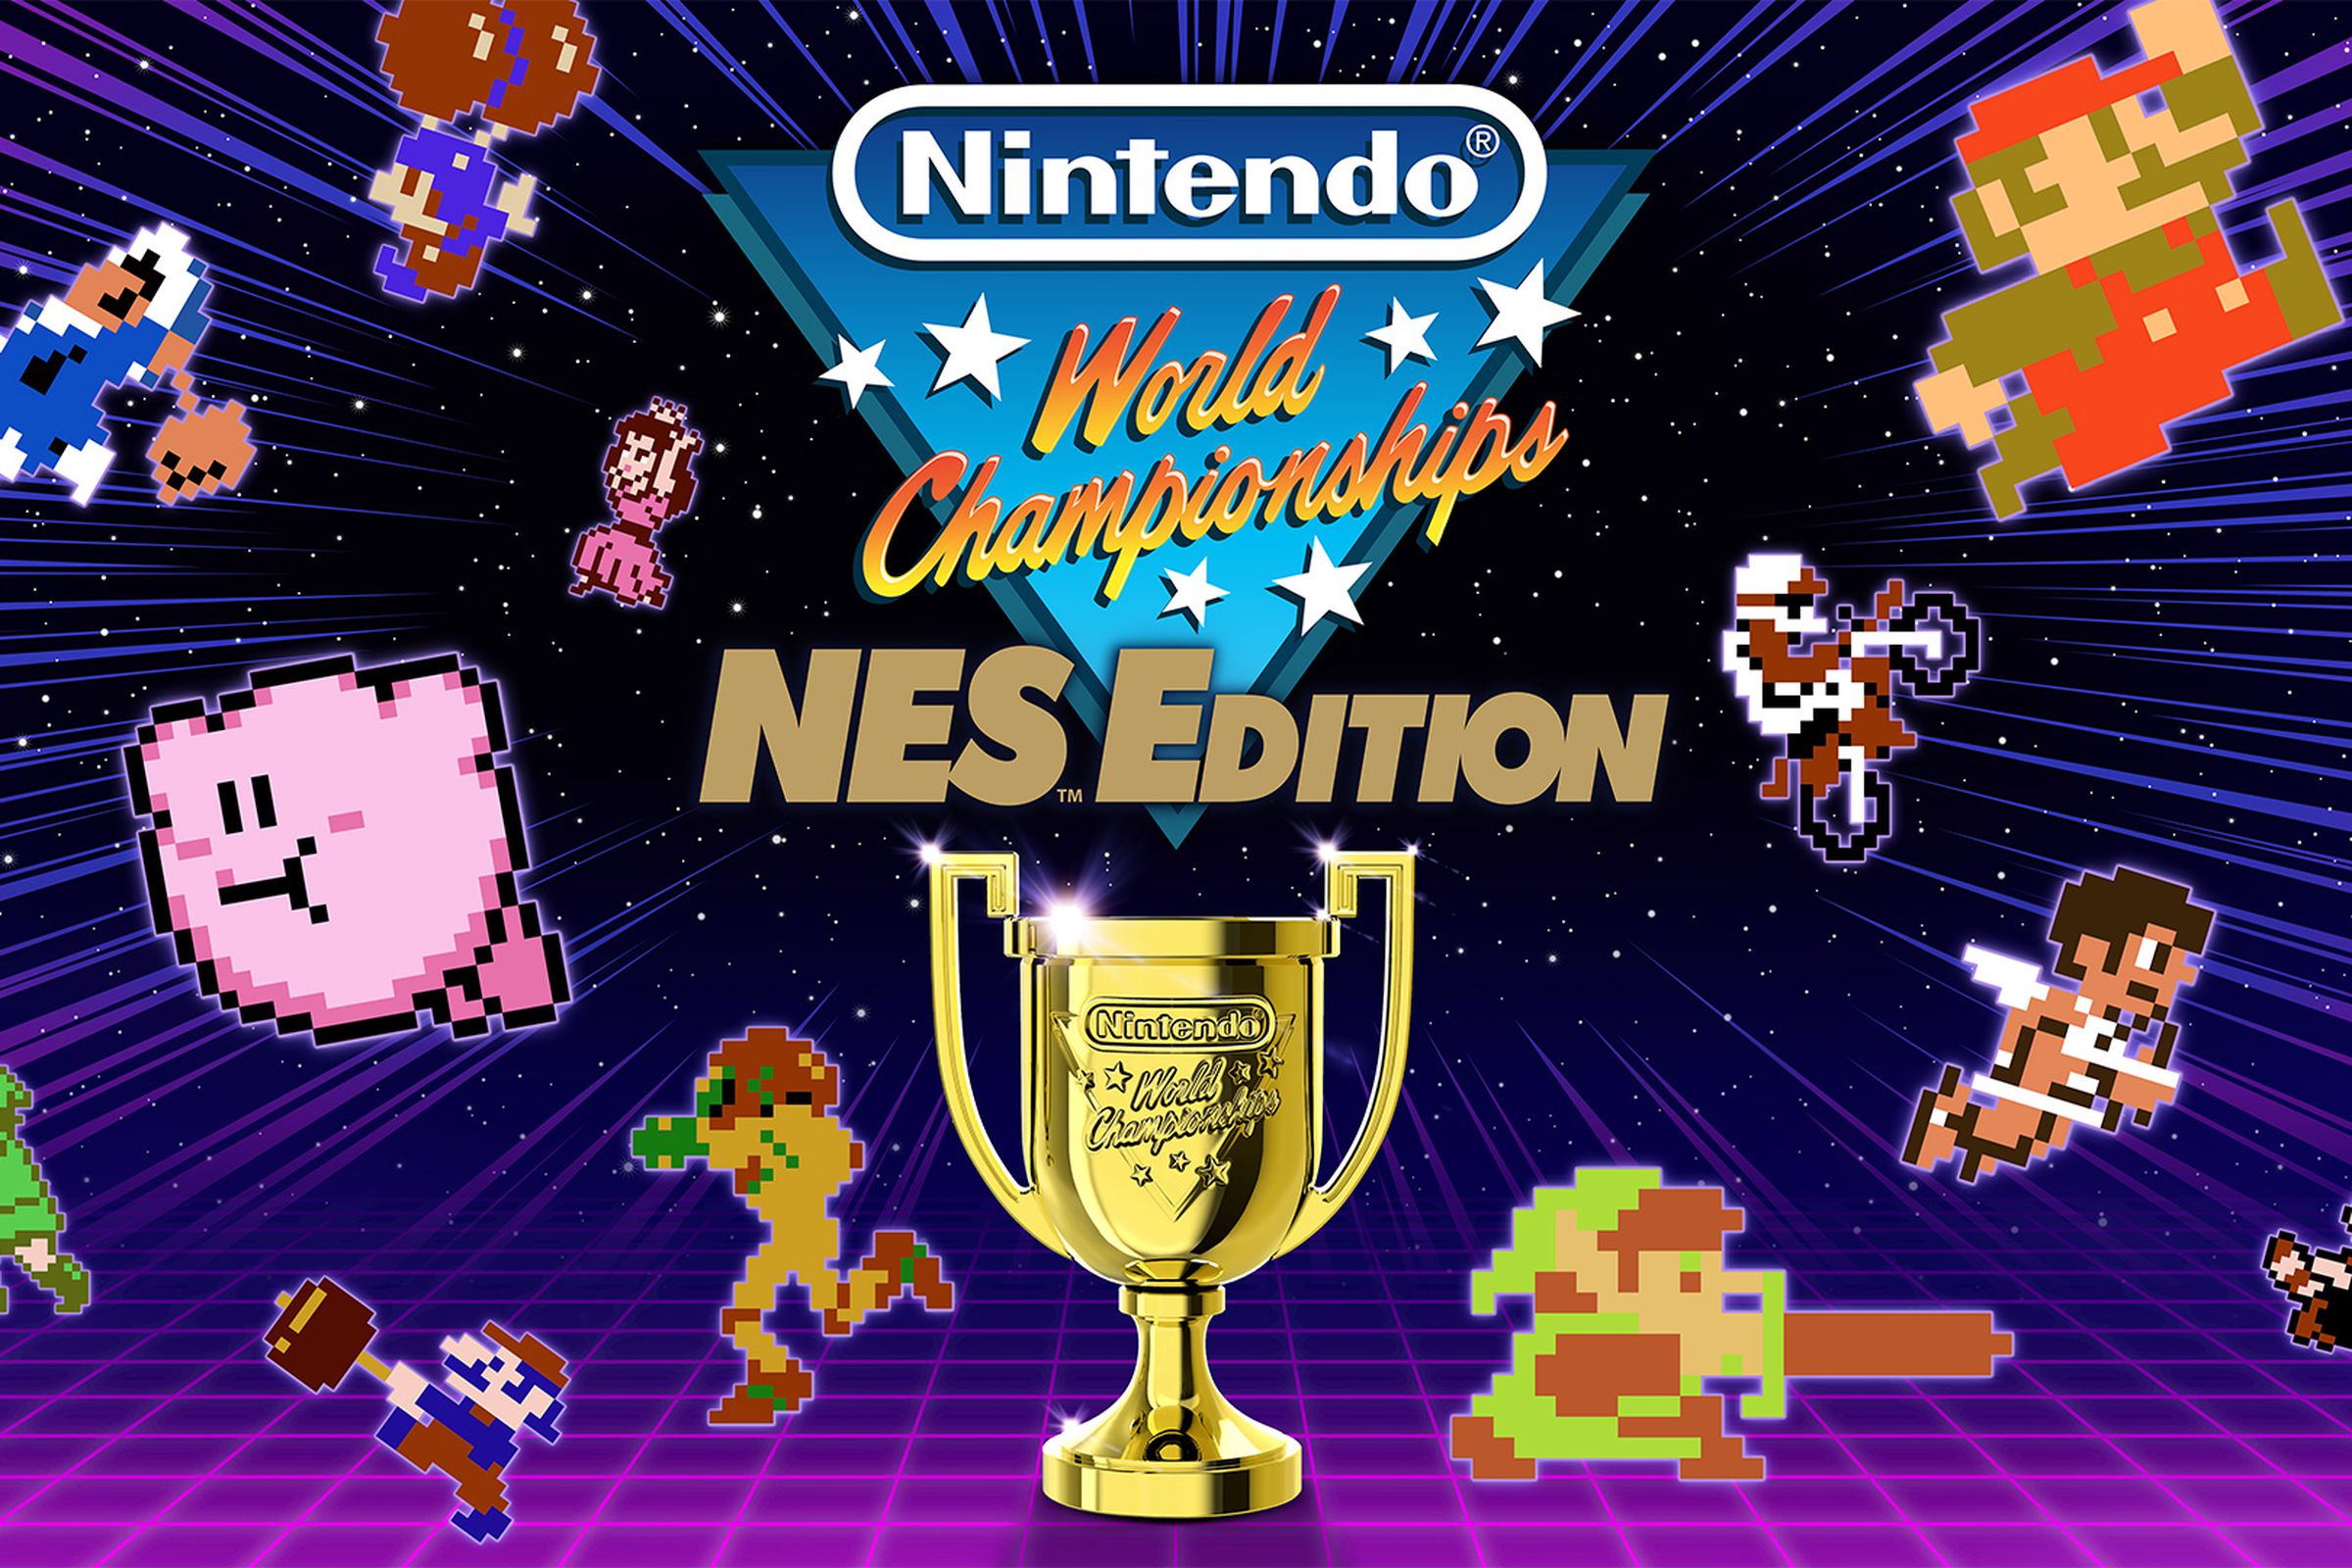 Promotional art for the video game Nintendo World Championships: NES Edition.